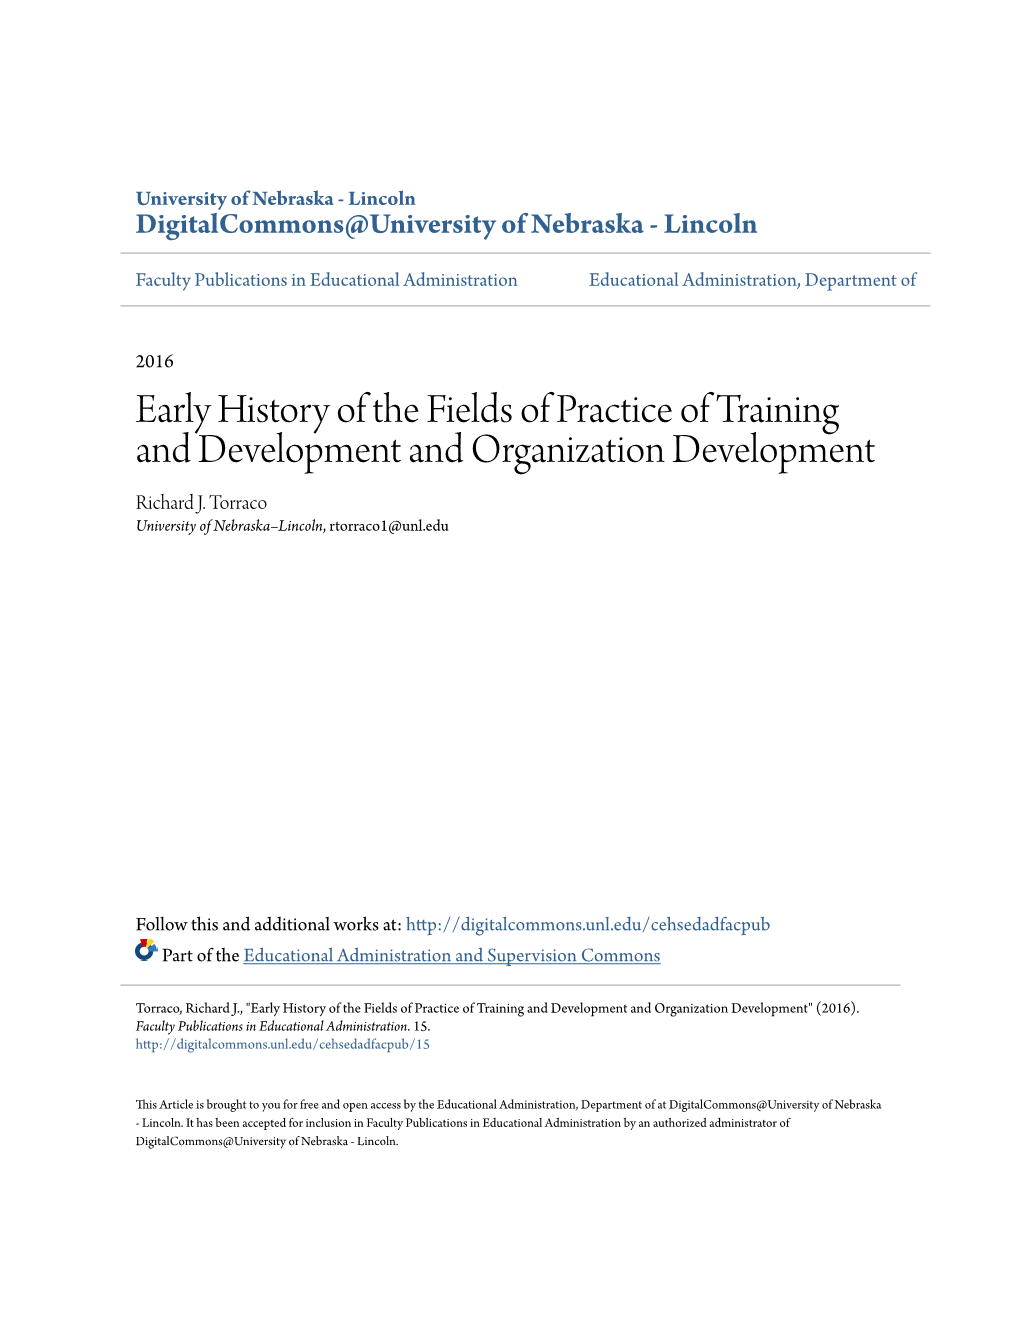 Early History of the Fields of Practice of Training and Development and Organization Development Richard J